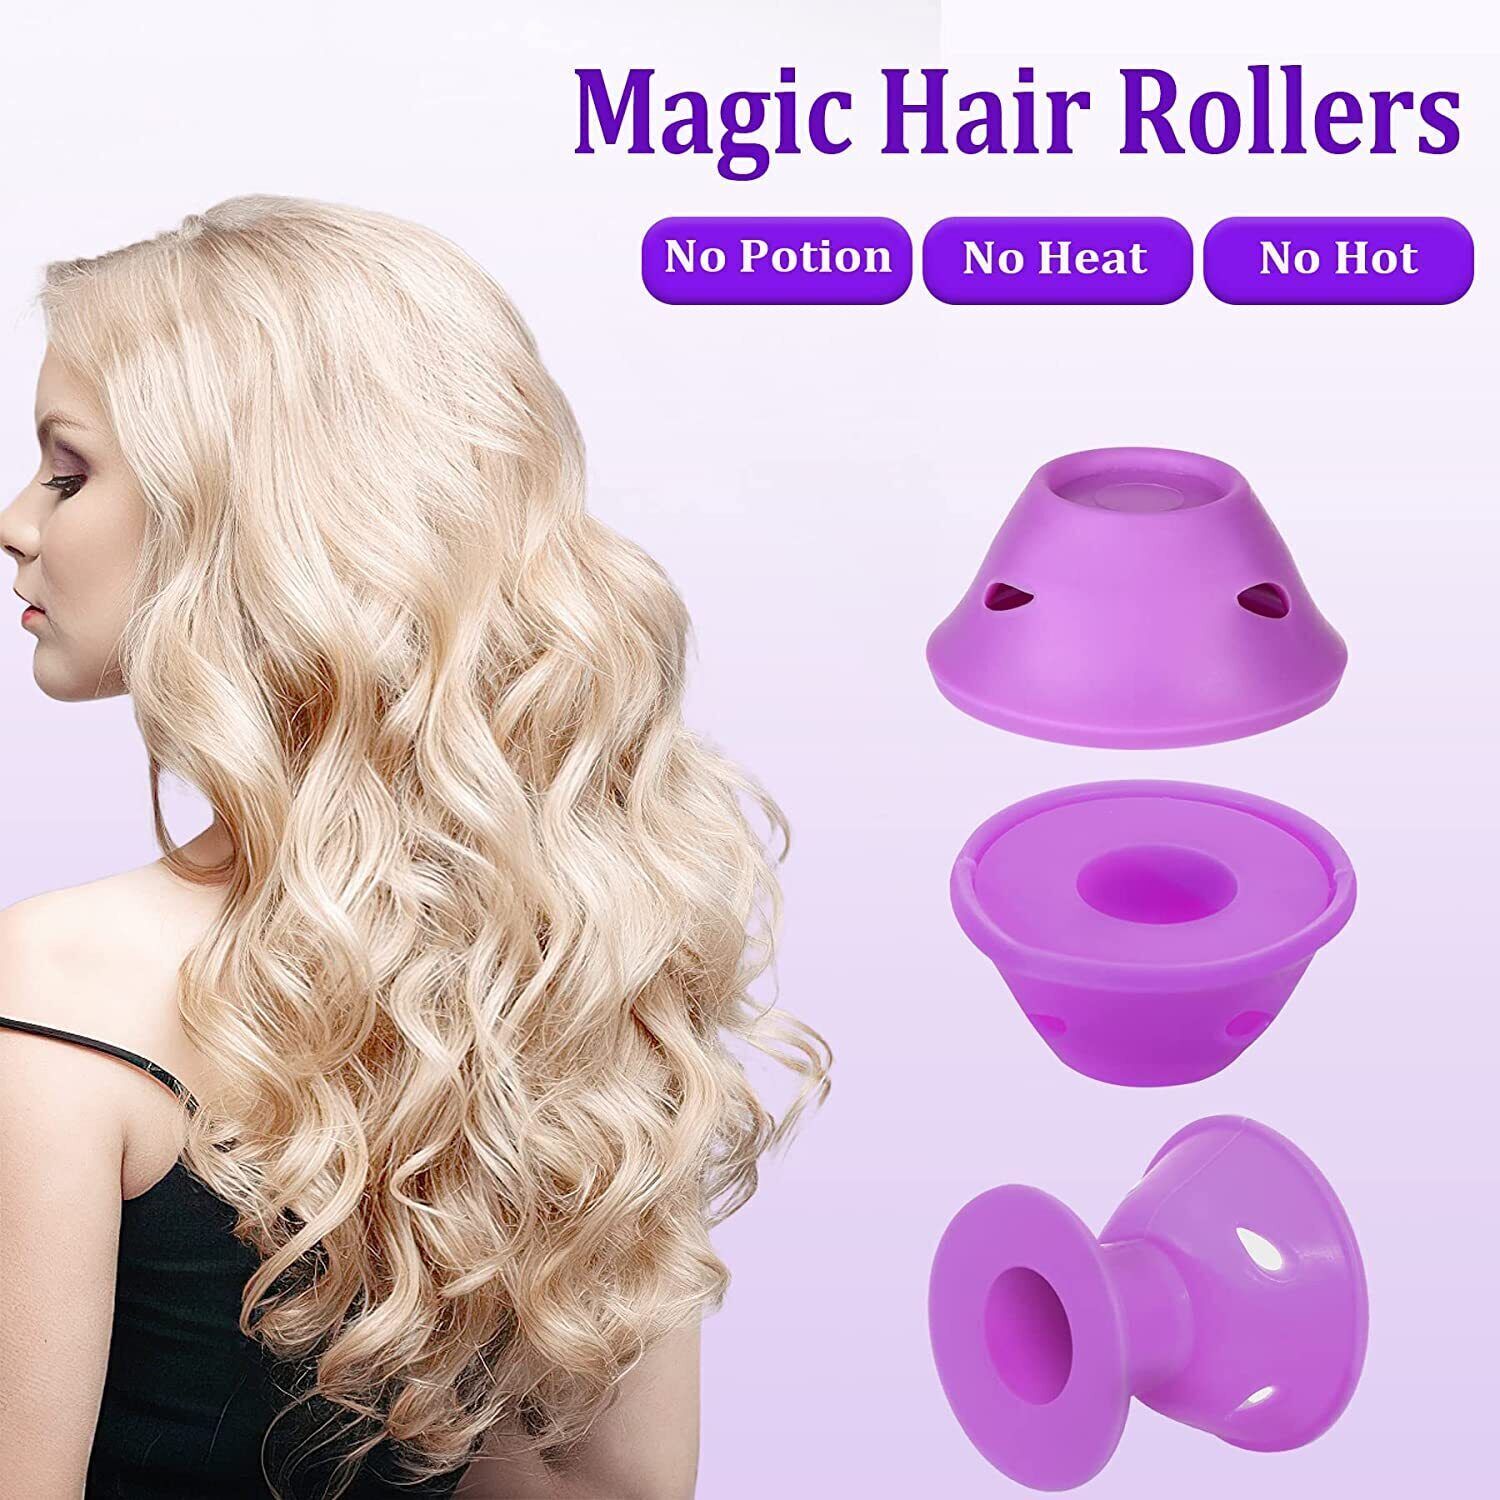 35 PCS Silicone No Heat Hair DIY Curlers Magic Soft Rollers Hair Care Tool Unbranded DOES NOT APPLY - фотография #3